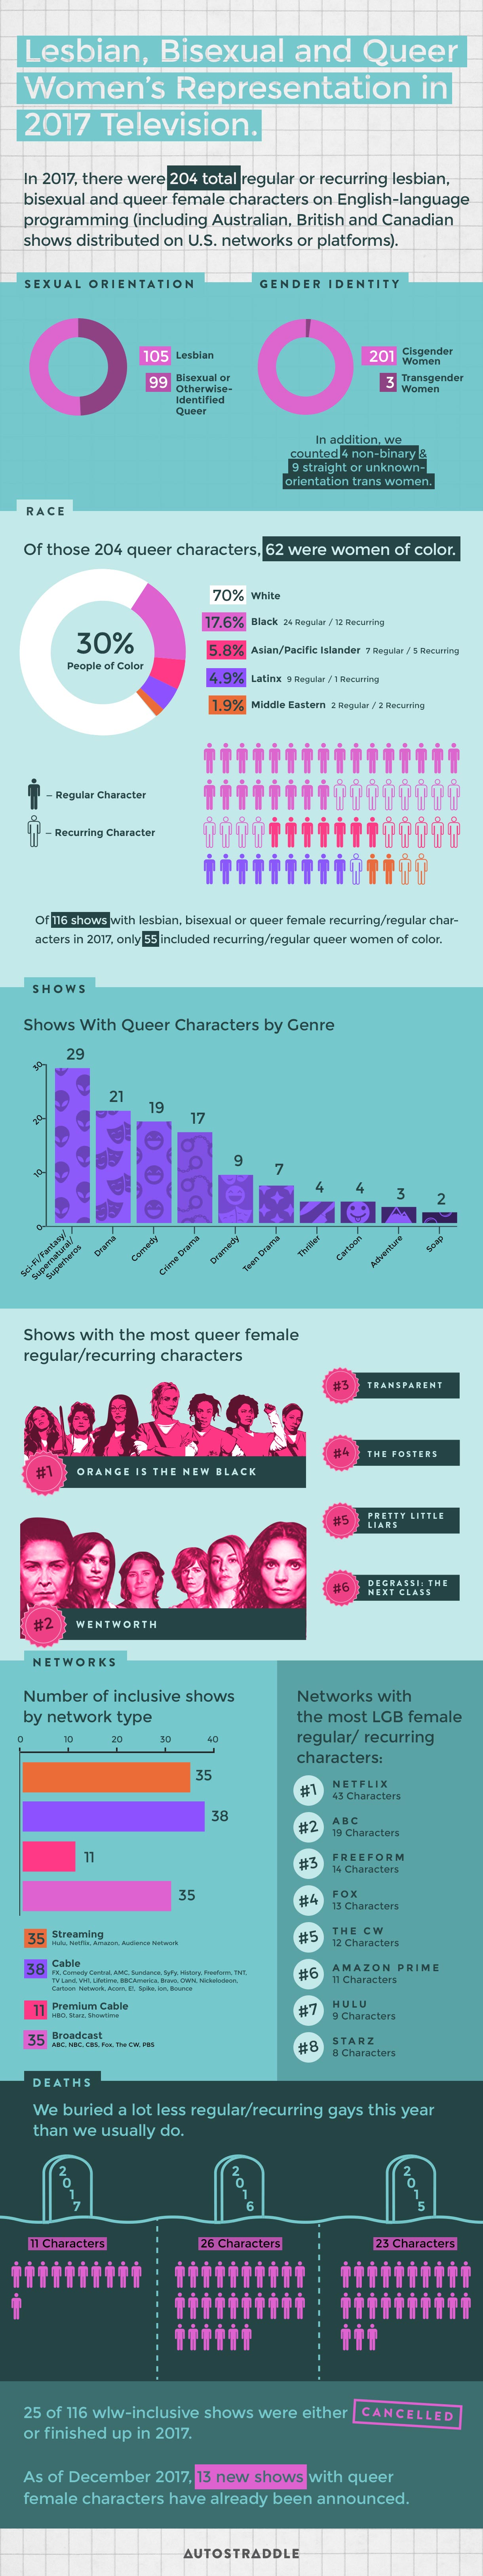 In 2017, Lesbian and Bisexual TV Characters Did Pretty OK, and That's a ...